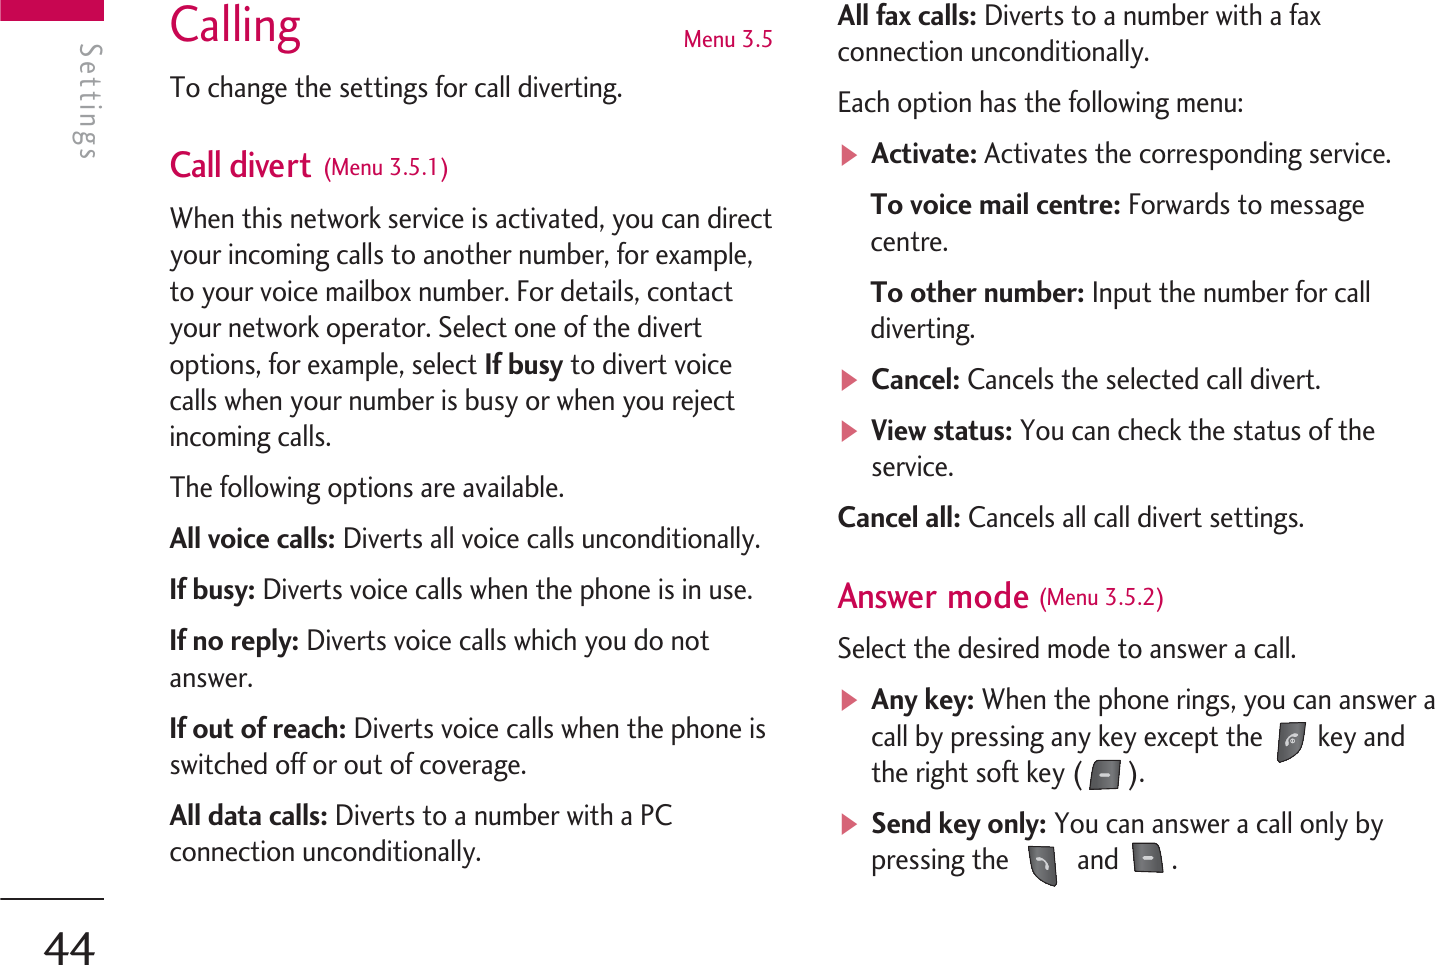 Calling  Menu 3.5To change the settings for call diverting.Call divert (Menu 3.5.1)When this network service is activated, you can directyour incoming calls to another number, for example,to your voice mailbox number. For details, contactyour network operator. Select one of the divertoptions, for example, select If busy to divert voicecalls when your number is busy or when you rejectincoming calls.The following options are available.All voice calls: Diverts all voice calls unconditionally.If busy: Diverts voice calls when the phone is in use.If no reply: Diverts voice calls which you do notanswer.If out of reach: Diverts voice calls when the phone isswitched off or out of coverage.All data calls: Diverts to a number with a PCconnection unconditionally.All fax calls: Diverts to a number with a faxconnection unconditionally.Each option has the following menu:vActivate: Activates the corresponding service.To voice mail centre: Forwards to messagecentre.To other number: Input the number for calldiverting. vCancel: Cancels the selected call divert.vView status: You can check the status of theservice.Cancel all: Cancels all call divert settings.Answer mode (Menu 3.5.2)Select the desired mode to answer a call.vAny key: When the phone rings, you can answer acall by pressing any key except the  key andthe right soft key ( ).vSend key only: You can answer a call only bypressing the   and  .SettingsSettings44